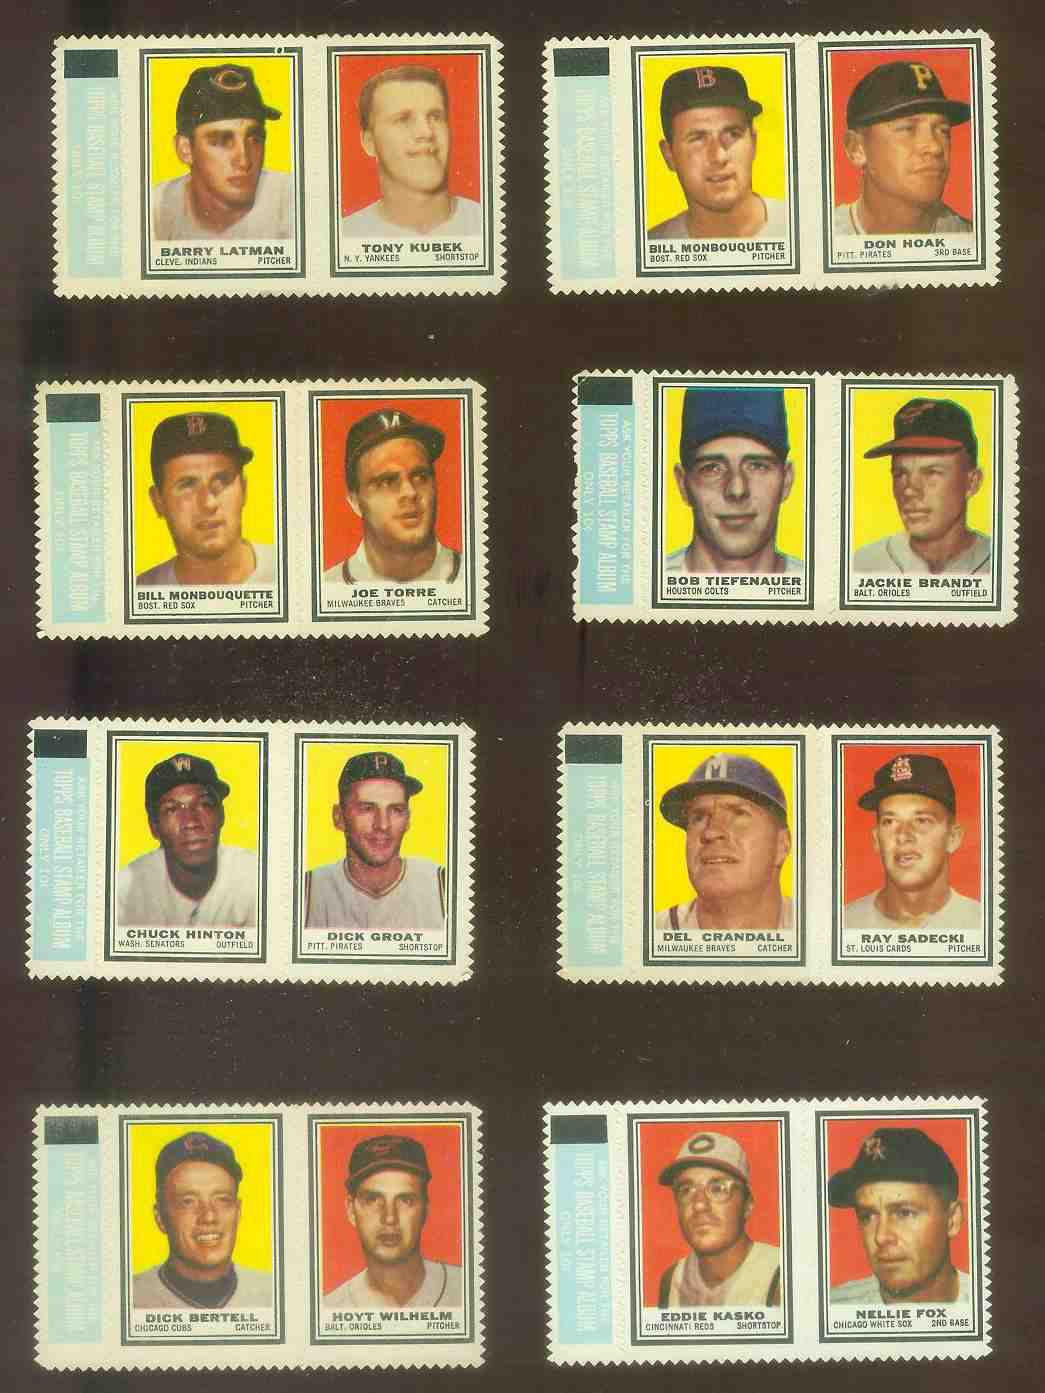   Bill Monbouquette/Don Hoak - 1962 Topps STAMP PANEL with TAB !!! Baseball cards value